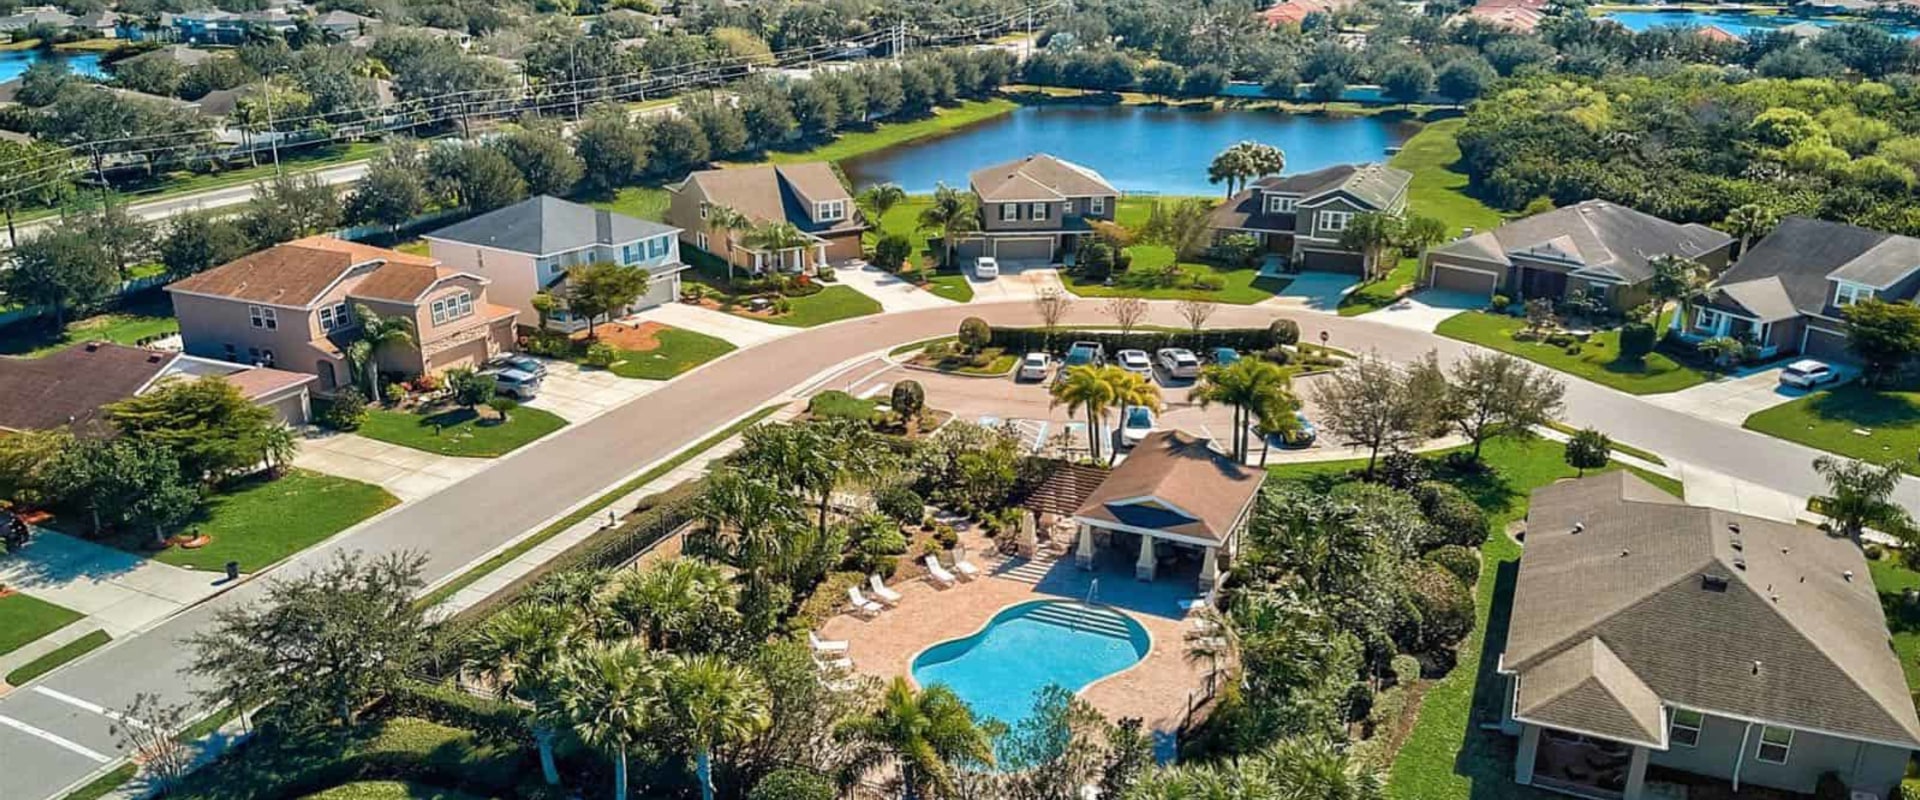 The Most Affordable Neighborhoods for First-Time Homebuyers in Bradenton, Florida